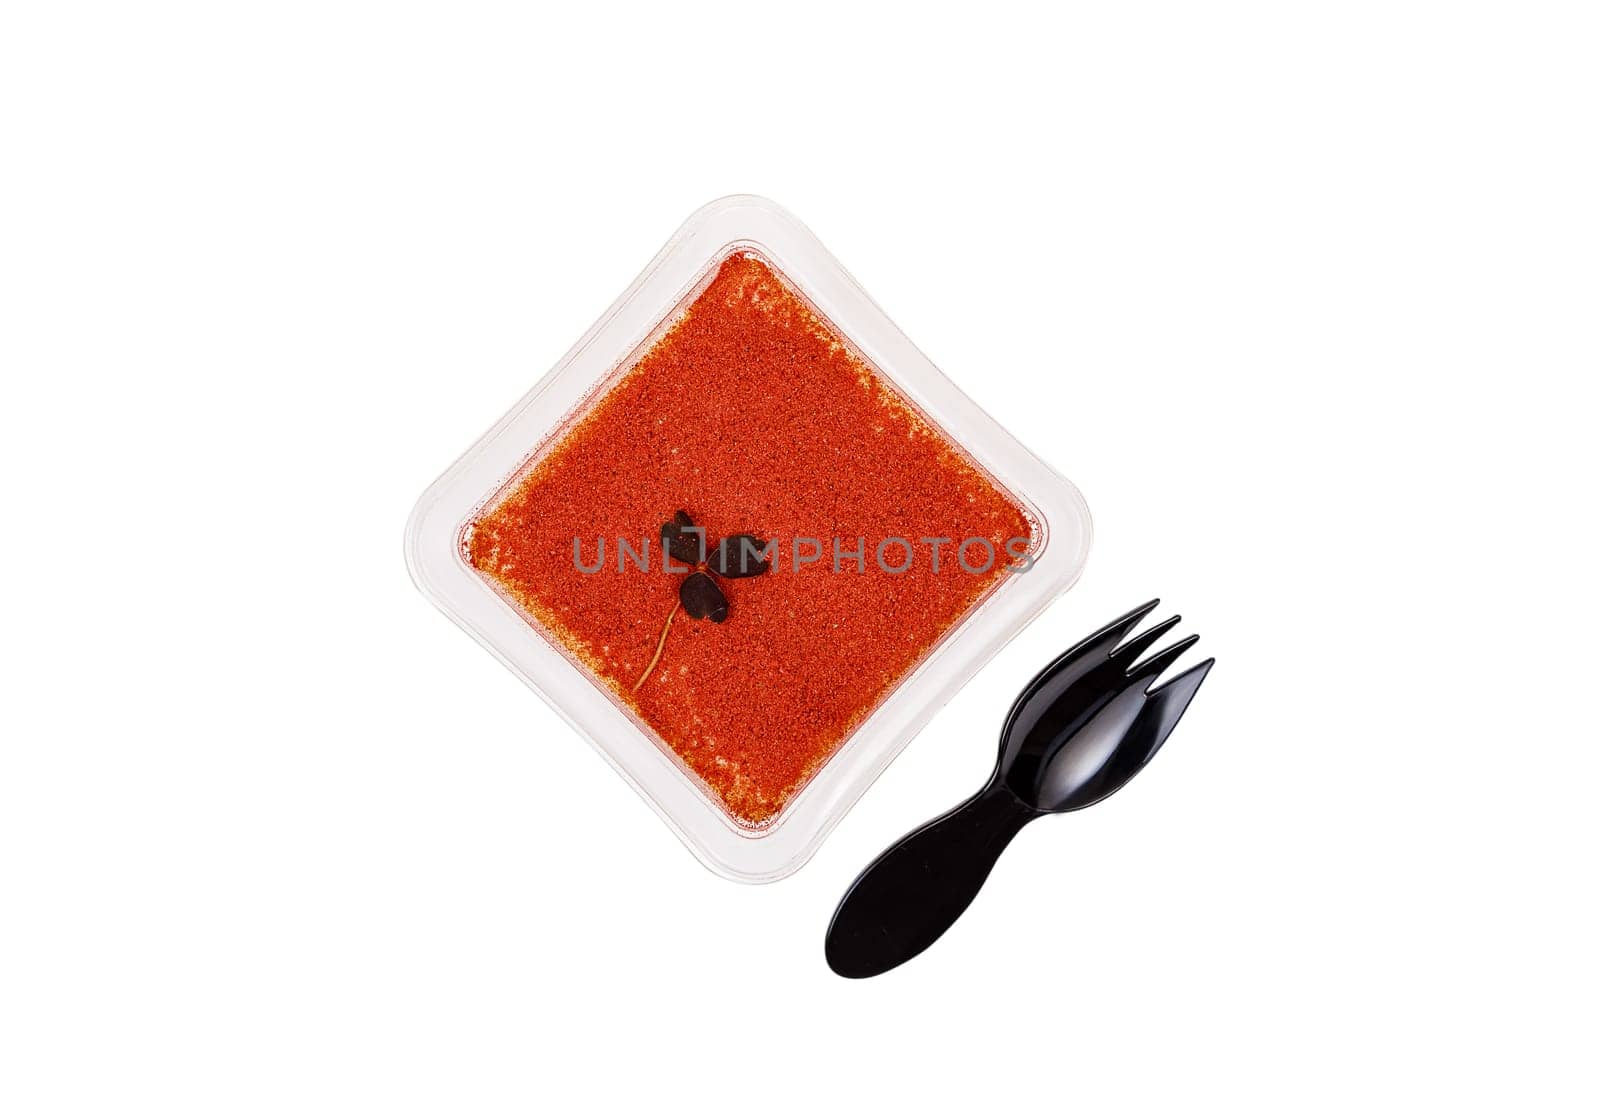 Tiramisu dessert in a plastic box with a fork on a white background. High quality photo